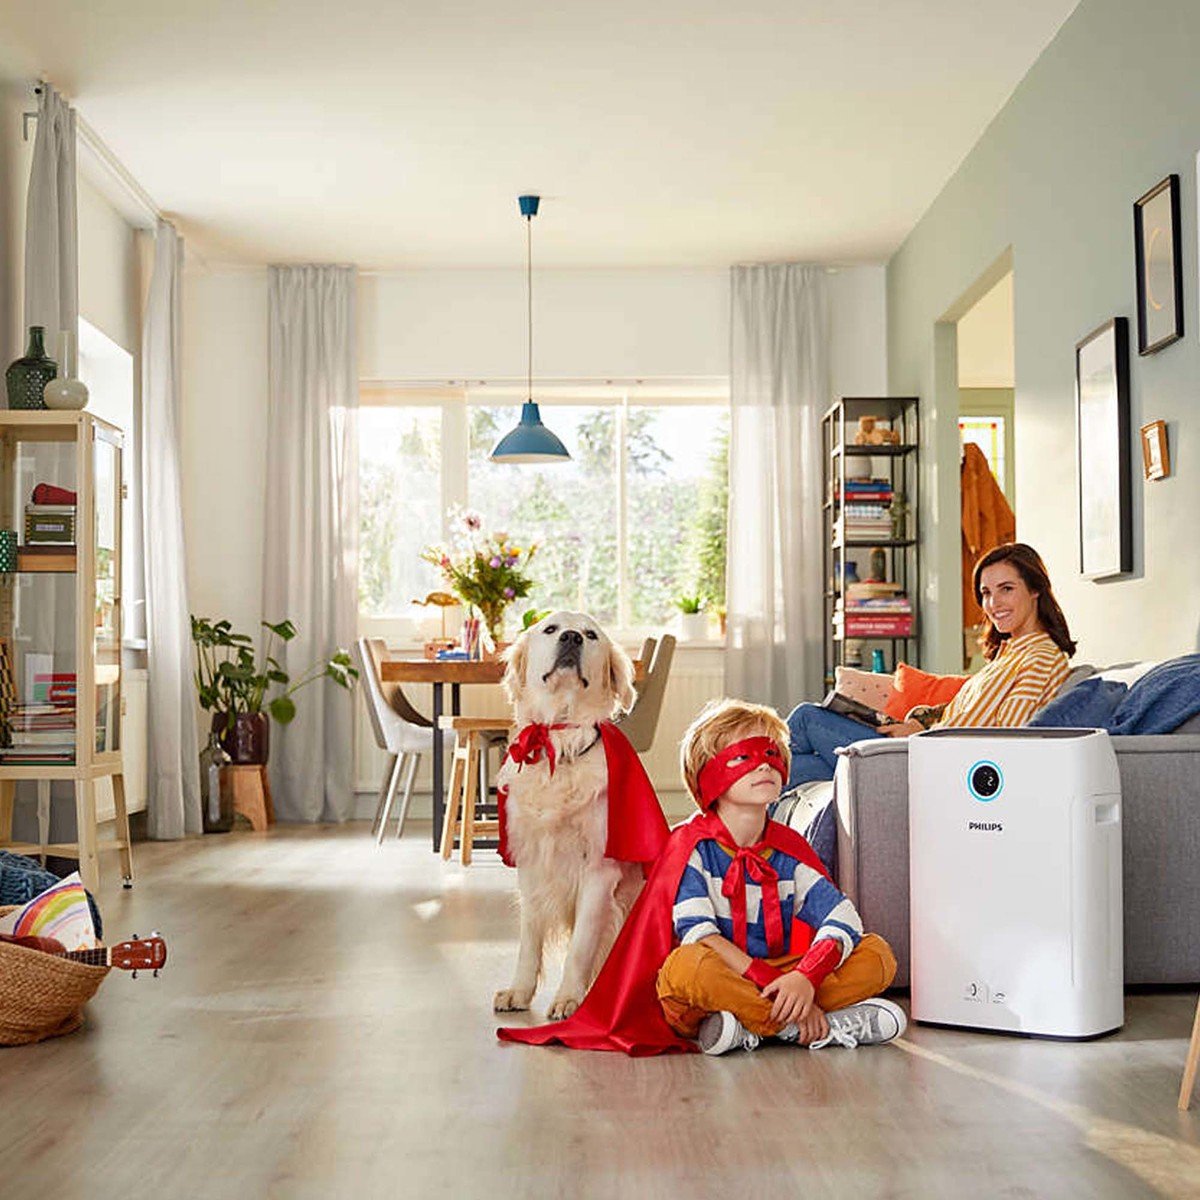 Philips Air Purifier With Humidifier AC2729/90